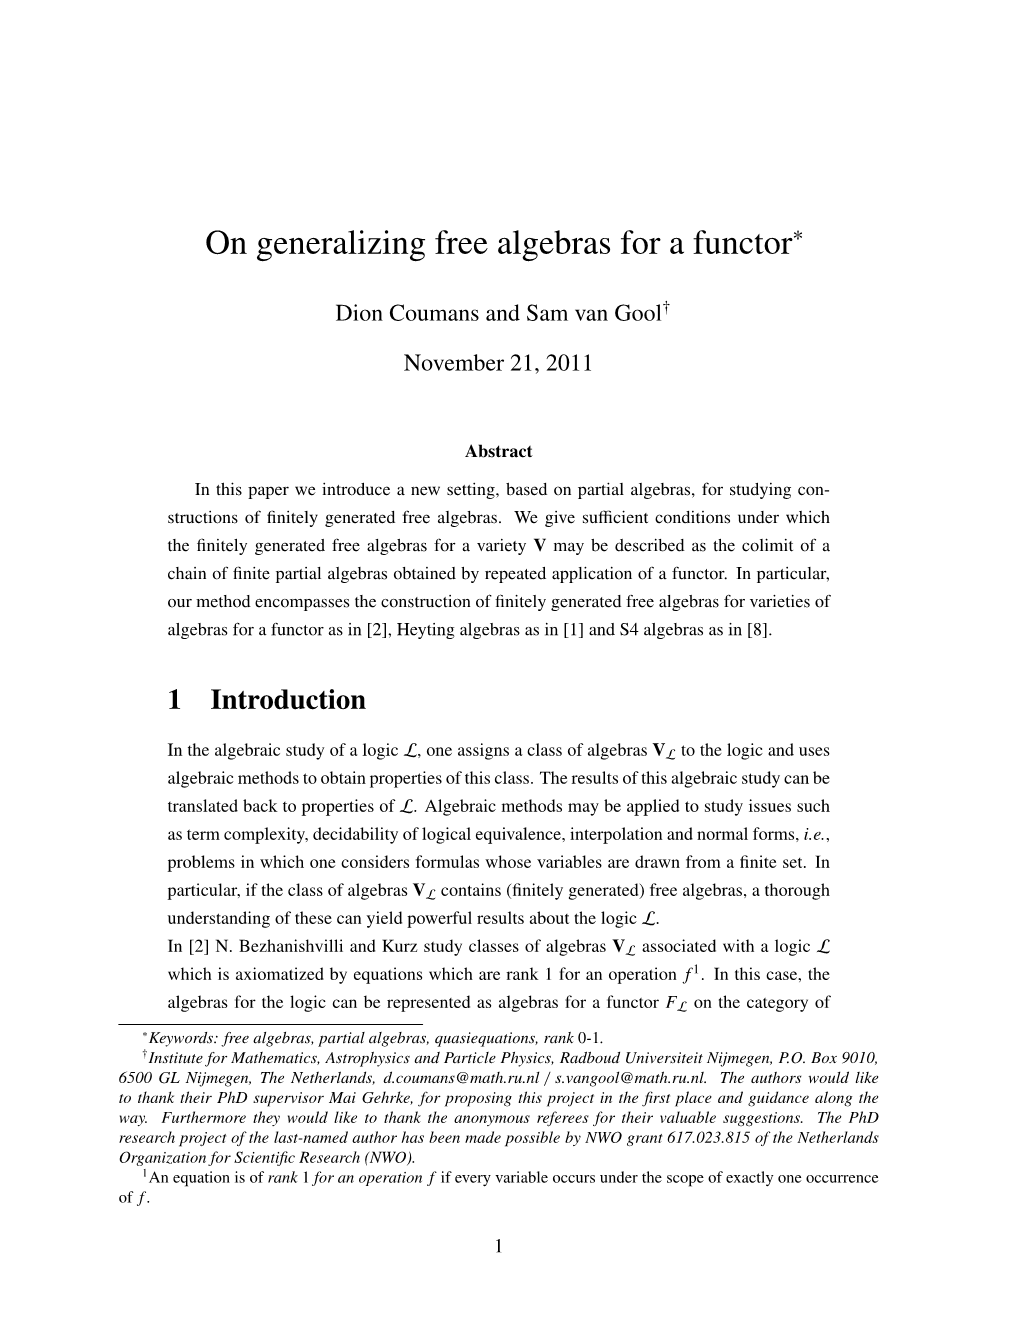 On Generalizing Free Algebras for a Functor∗